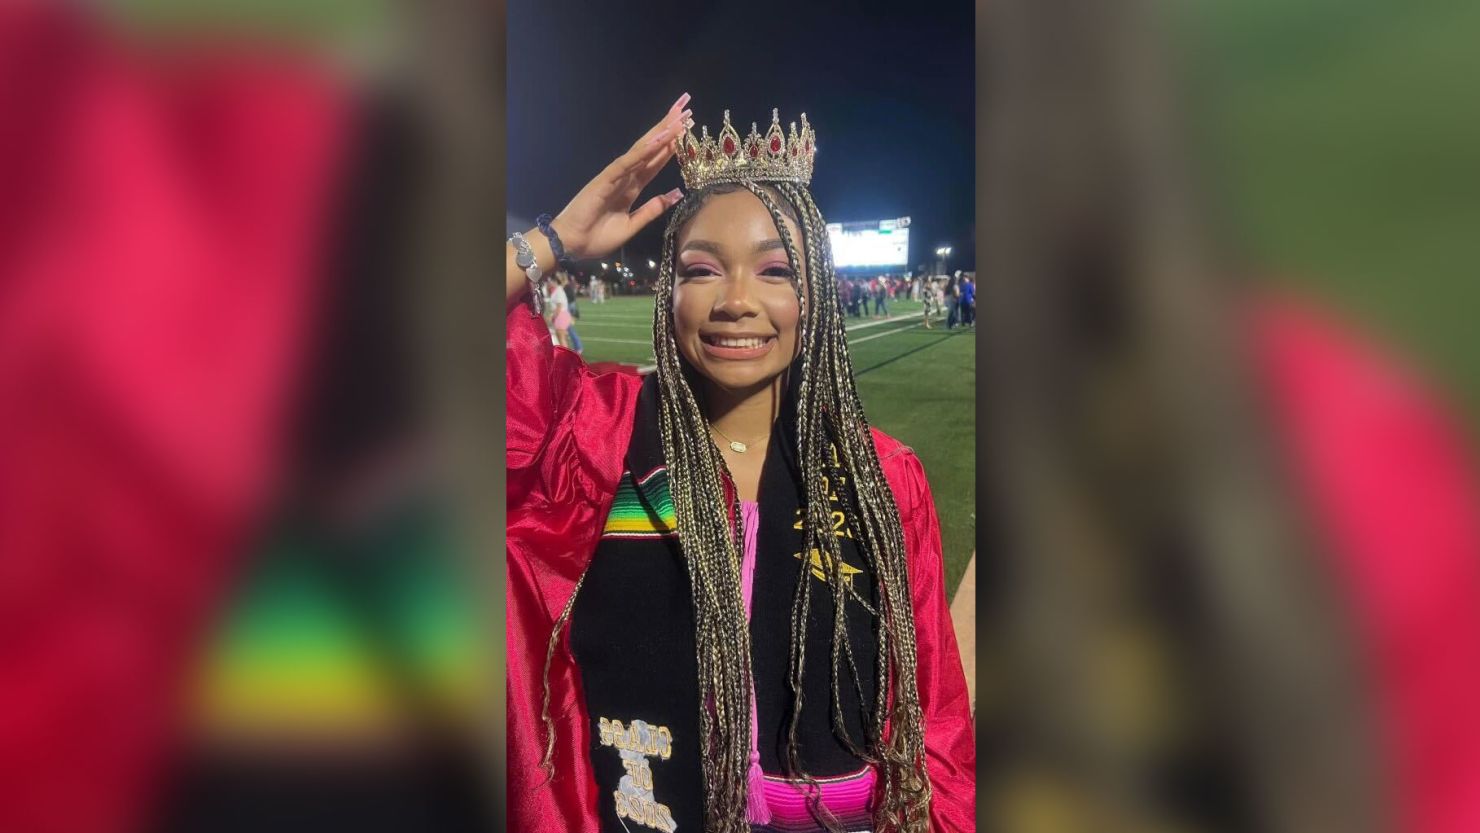 A reigning homecoming queen in Texas wore a Mexican heritage stole to her  graduation. Now, her school says she can't crown her successor.